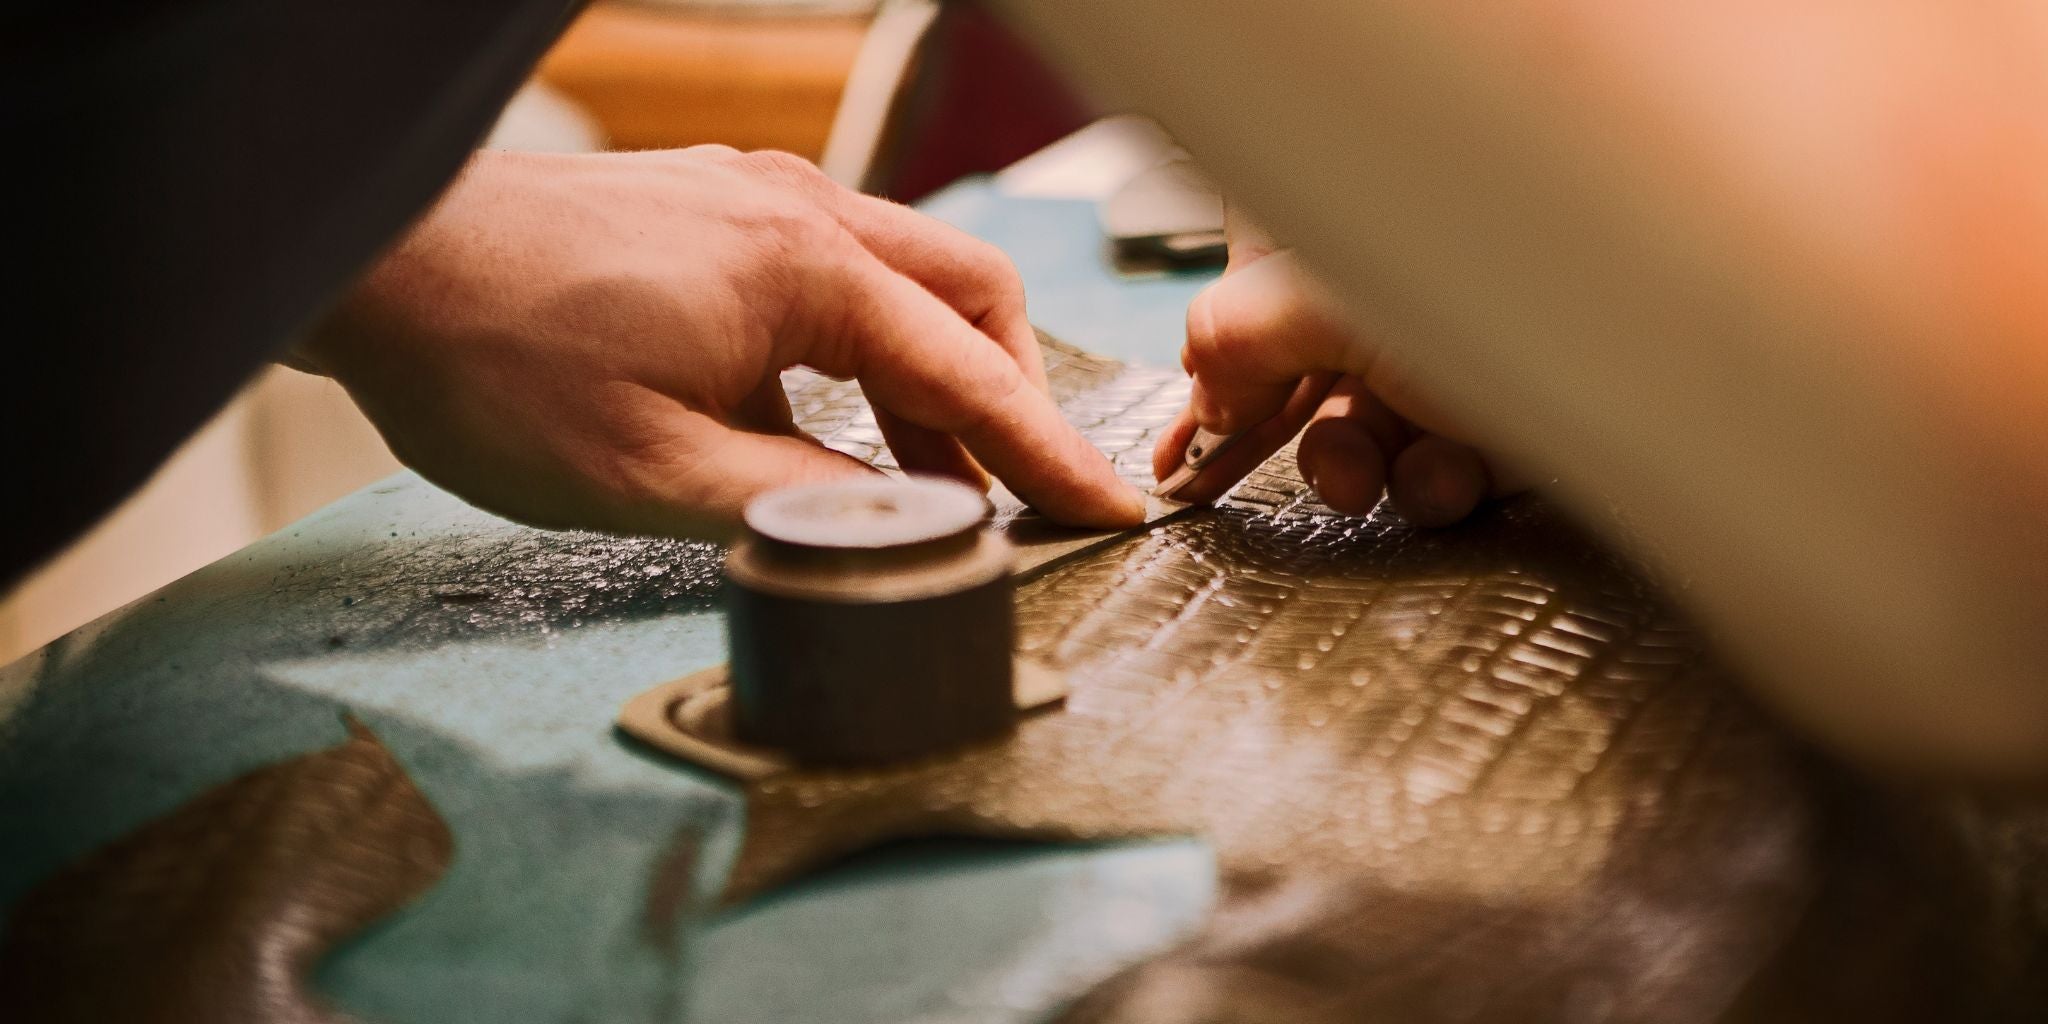 NUR Italy: Where Every Stitch Weaves a Tale of Italian Craftsmanship